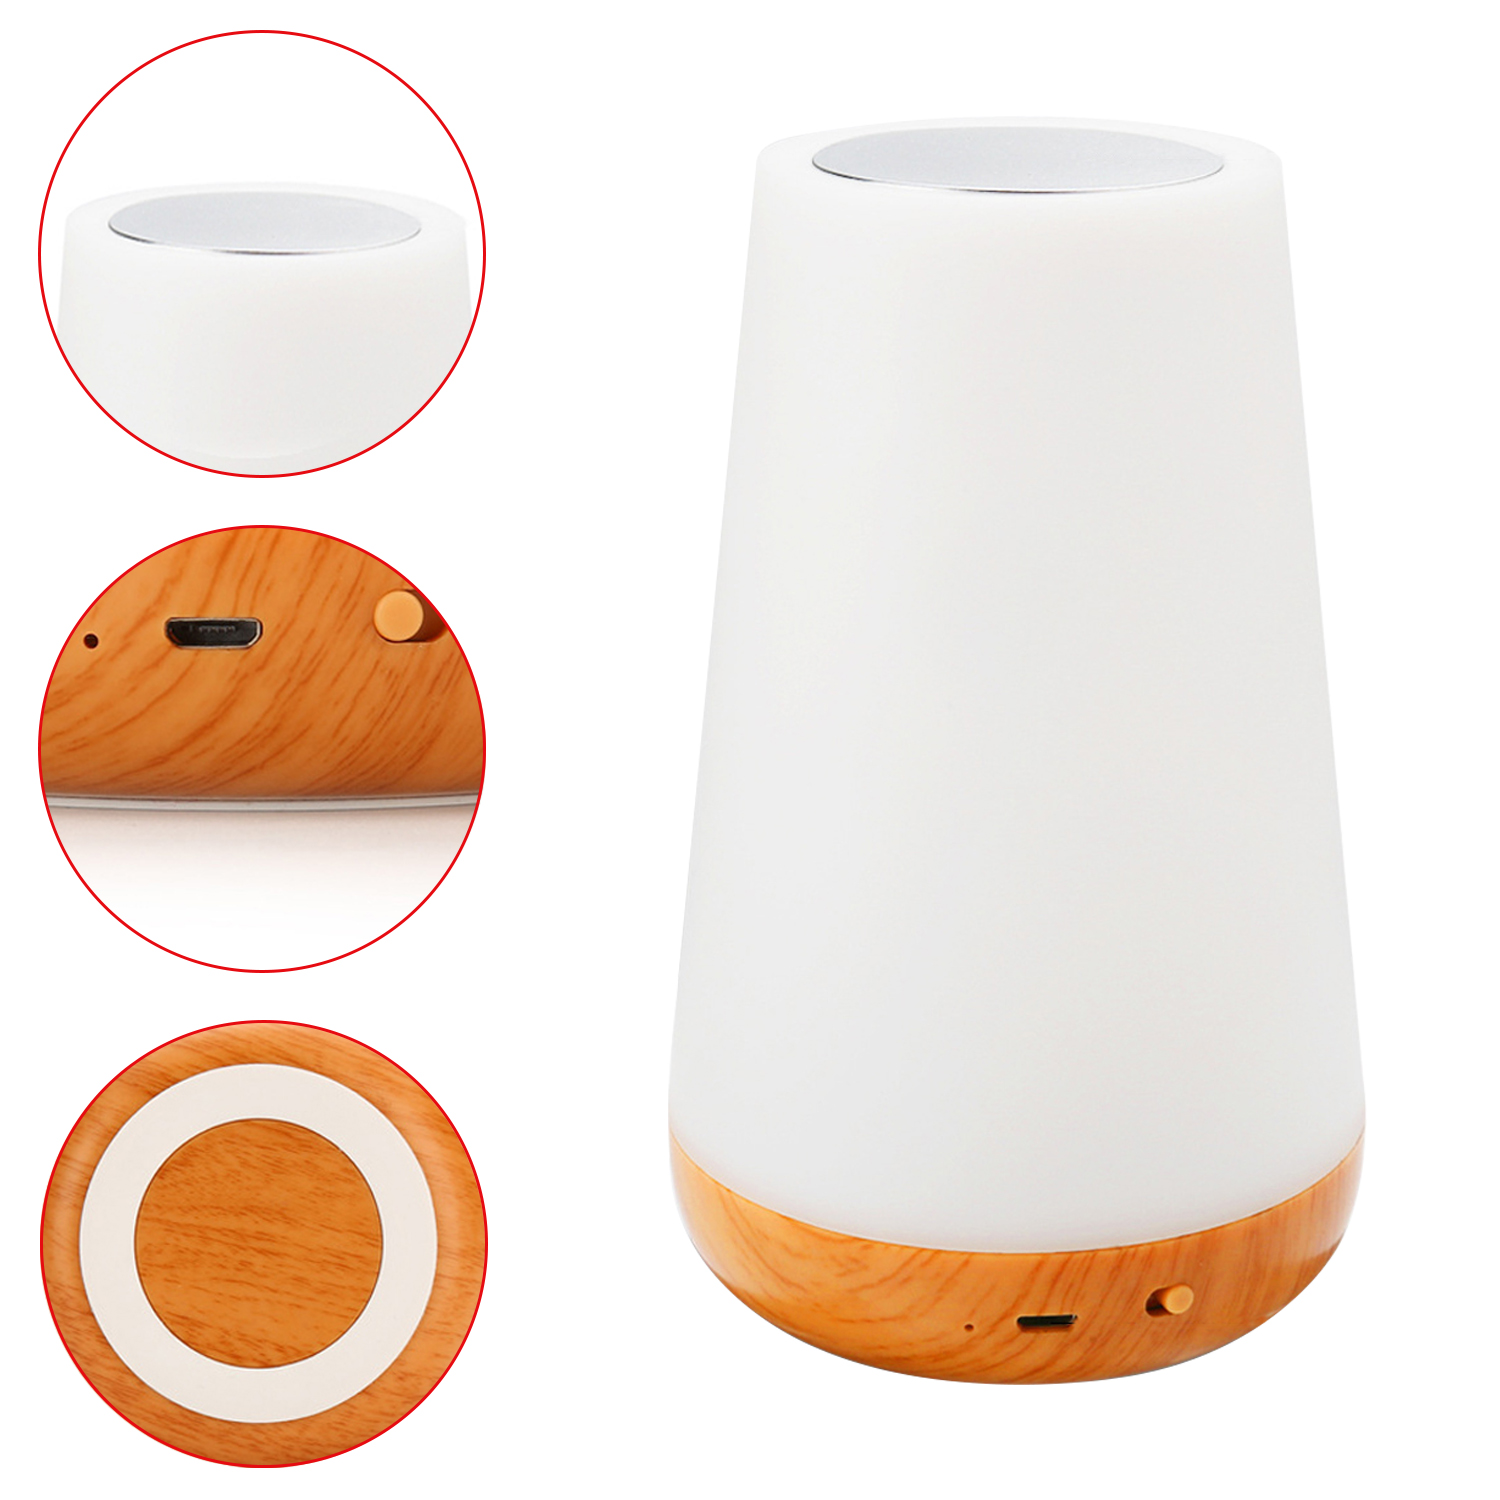 Night Light RGB Remote Control Touch Dimmable Lamp Portable Table Bedside Lamps USB Rechargeable Night Lamp